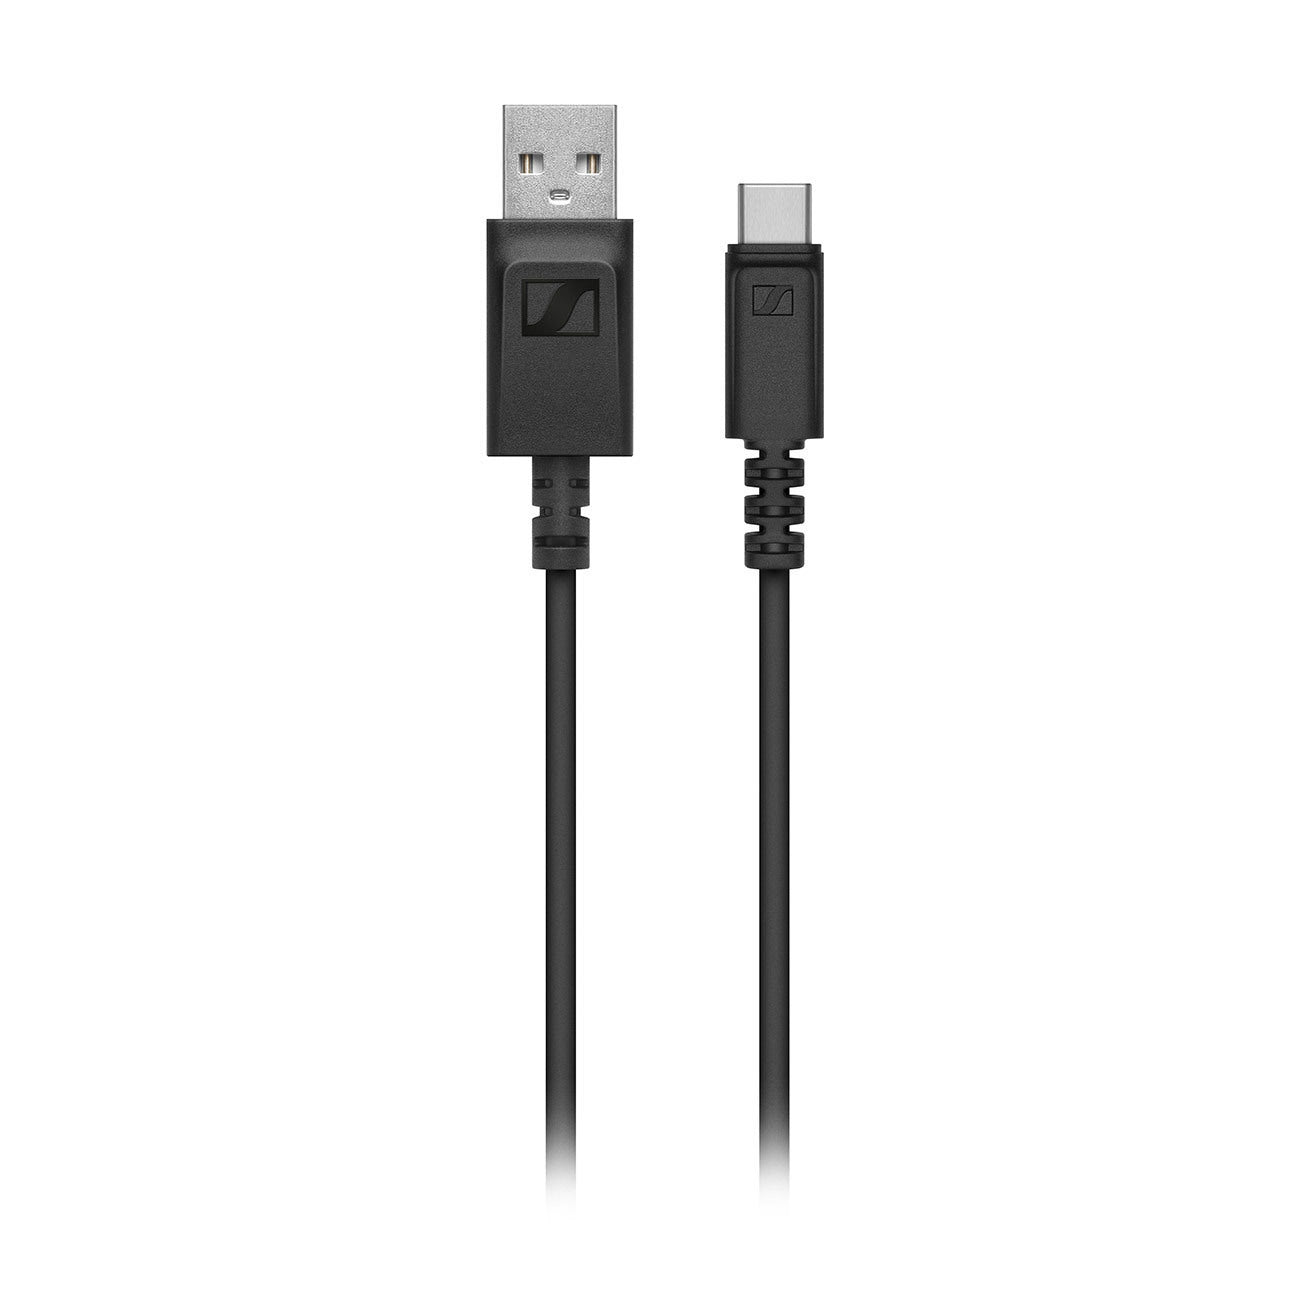 Sennheiser XS Wireless Digital - XSW-D Portable Lavalier Mobile Kit, USB-A to USB-C charging cable